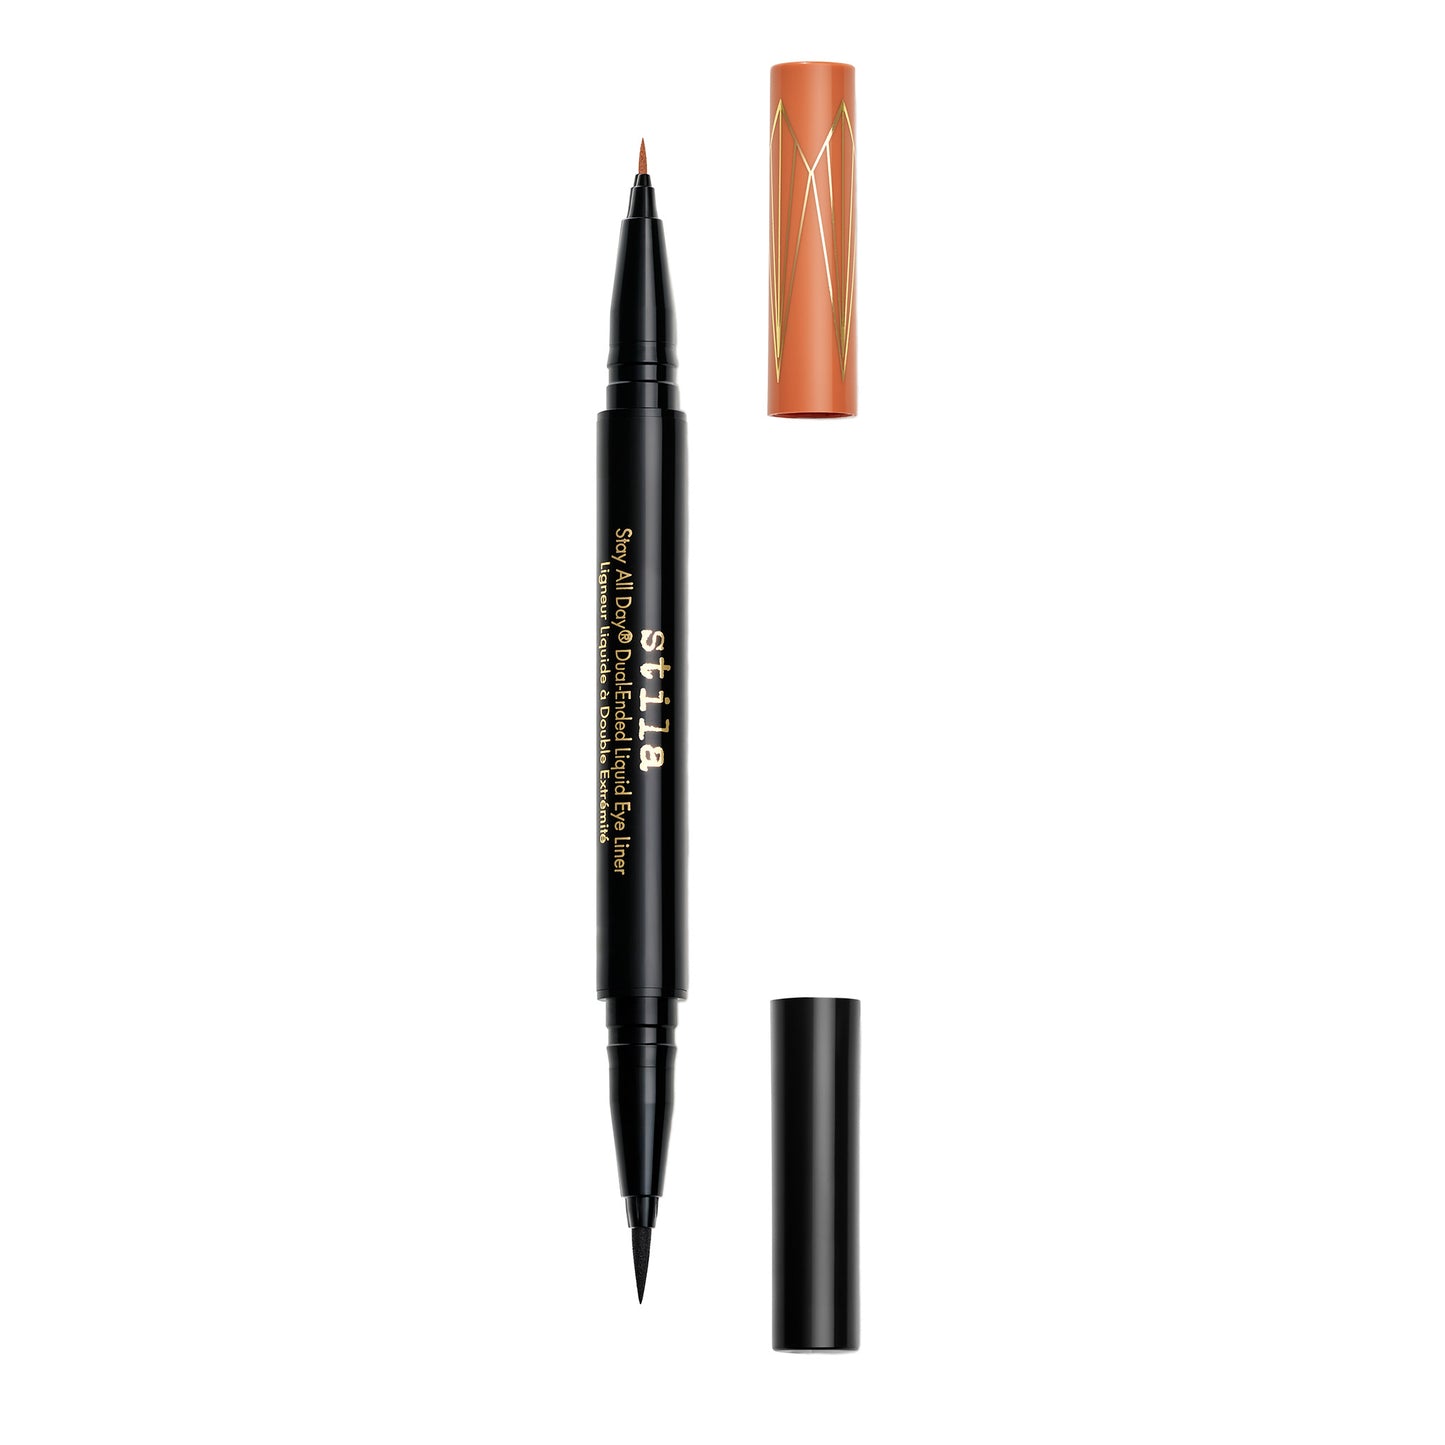 Load image into Gallery viewer, Stila Stay All Day® Dual-Ended Waterproof Liquid Eye Liner: Shimmer Micro Tip Mai Tai and Intense Black
